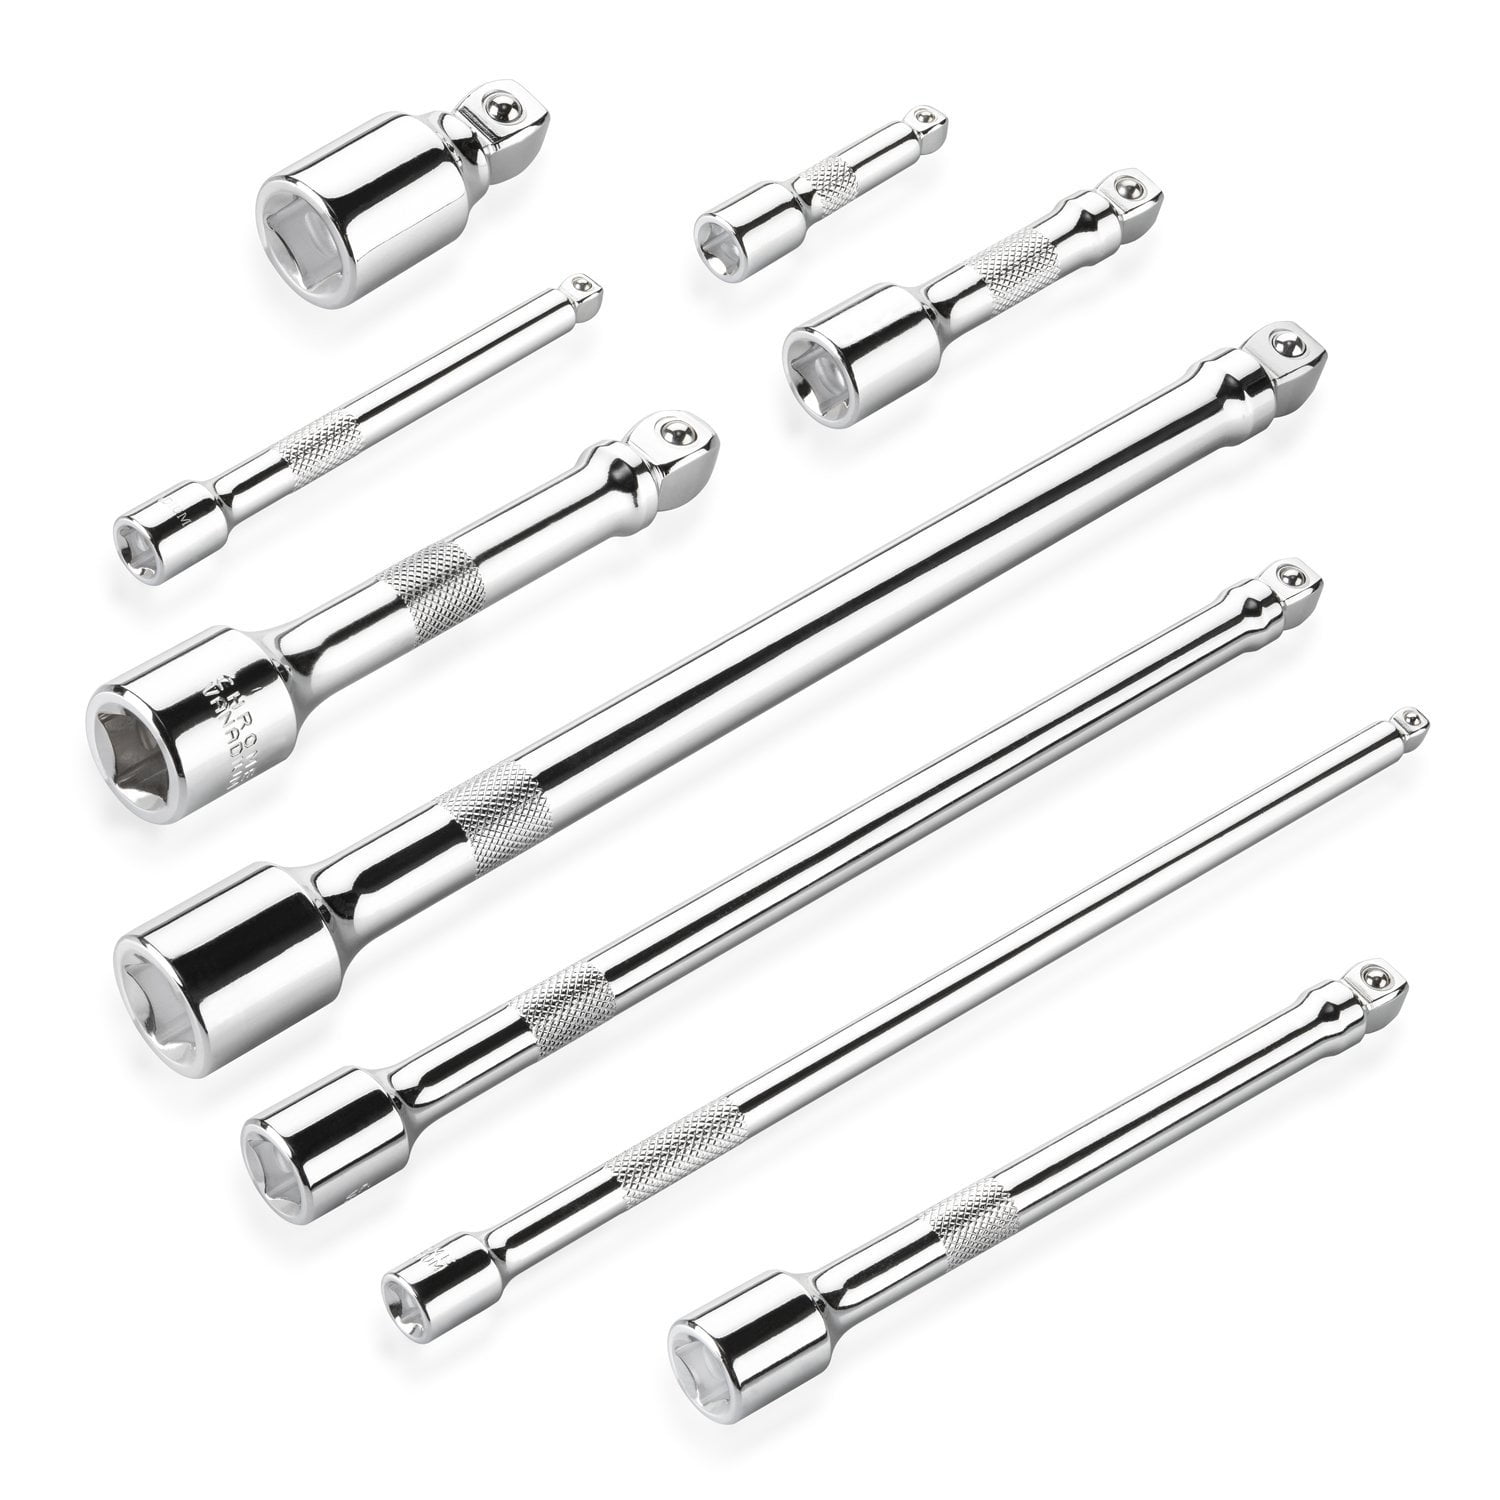 3/8-Inch Cr-V Steel Neiko 00249A Wobble Extension Bar Set 1/4-Inch 9 Piece Combination 1/2-Inch Drive 